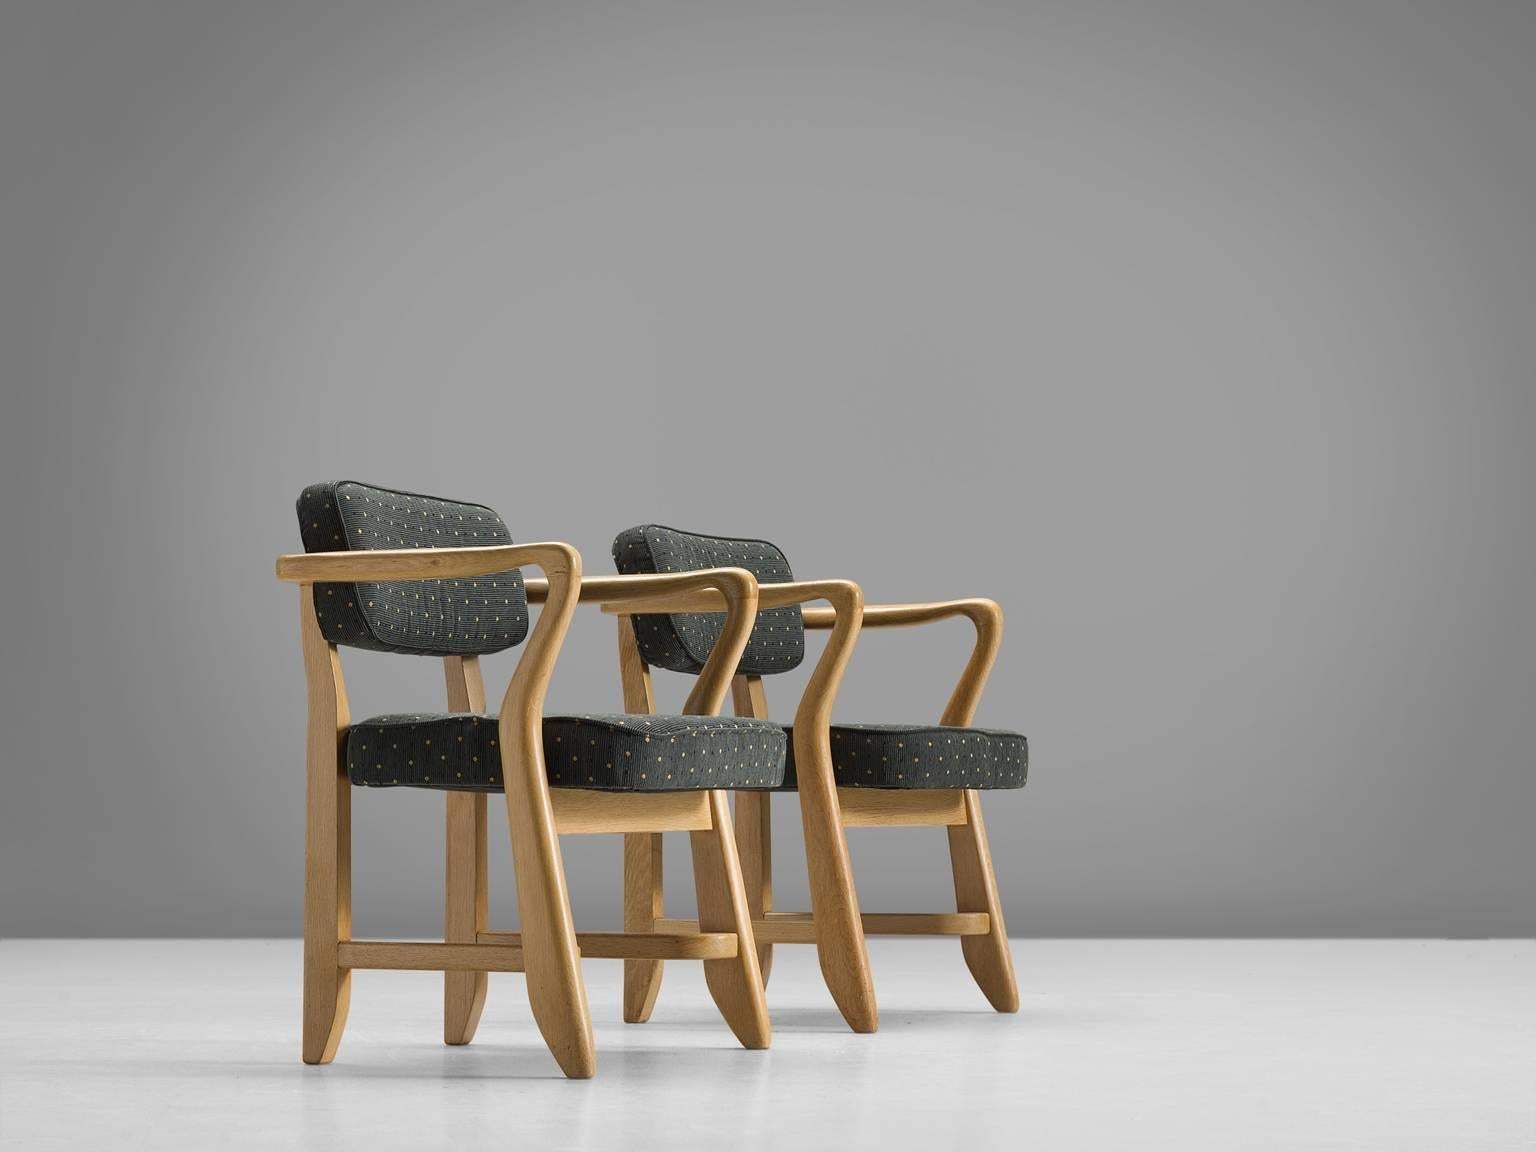 Armchairs, green fabric, oak, France, 1950s

These sculptural easy chair are designed by Guillerme and Chambron. The duo is known for their high quality solid oak furniture. These sculptural armchairs have an interesting open construction, featuring